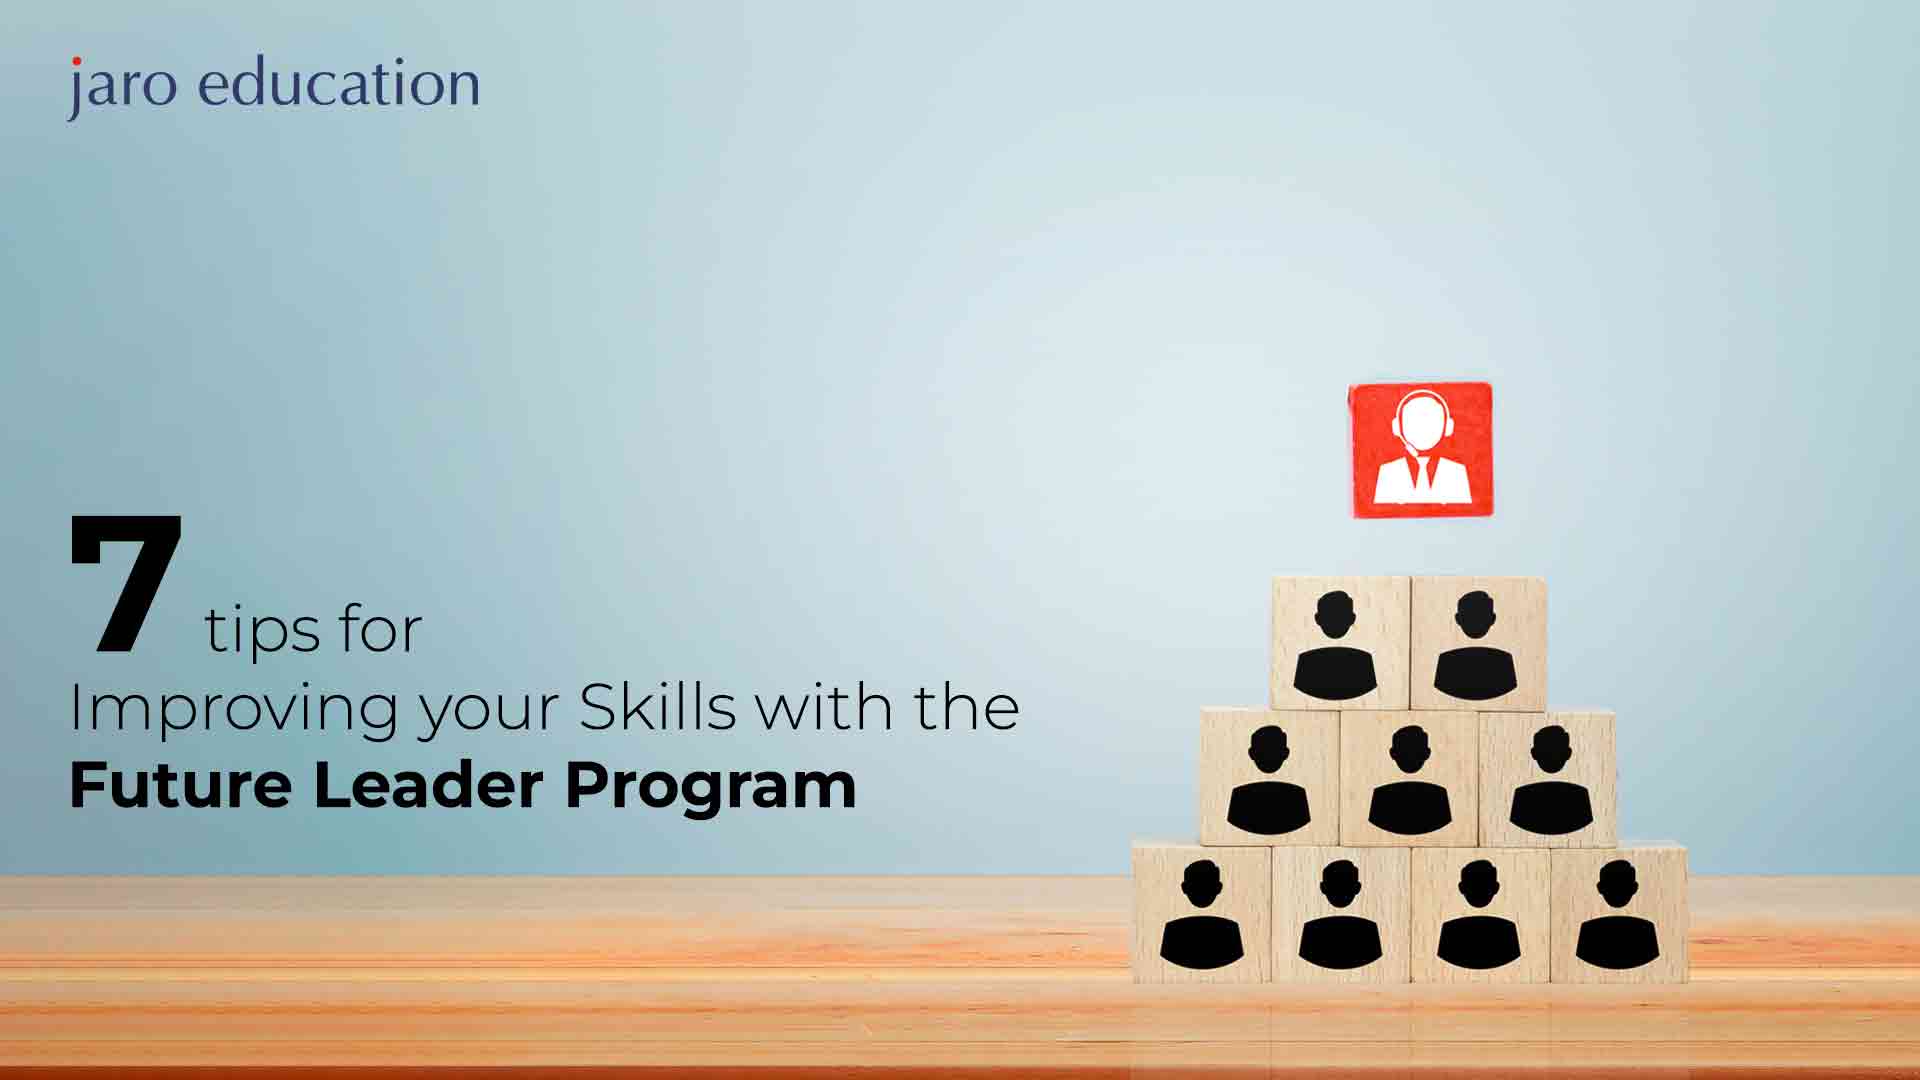 7-tips-for-Improving-your-Skills-with-the-Future-Leader-Program jaro